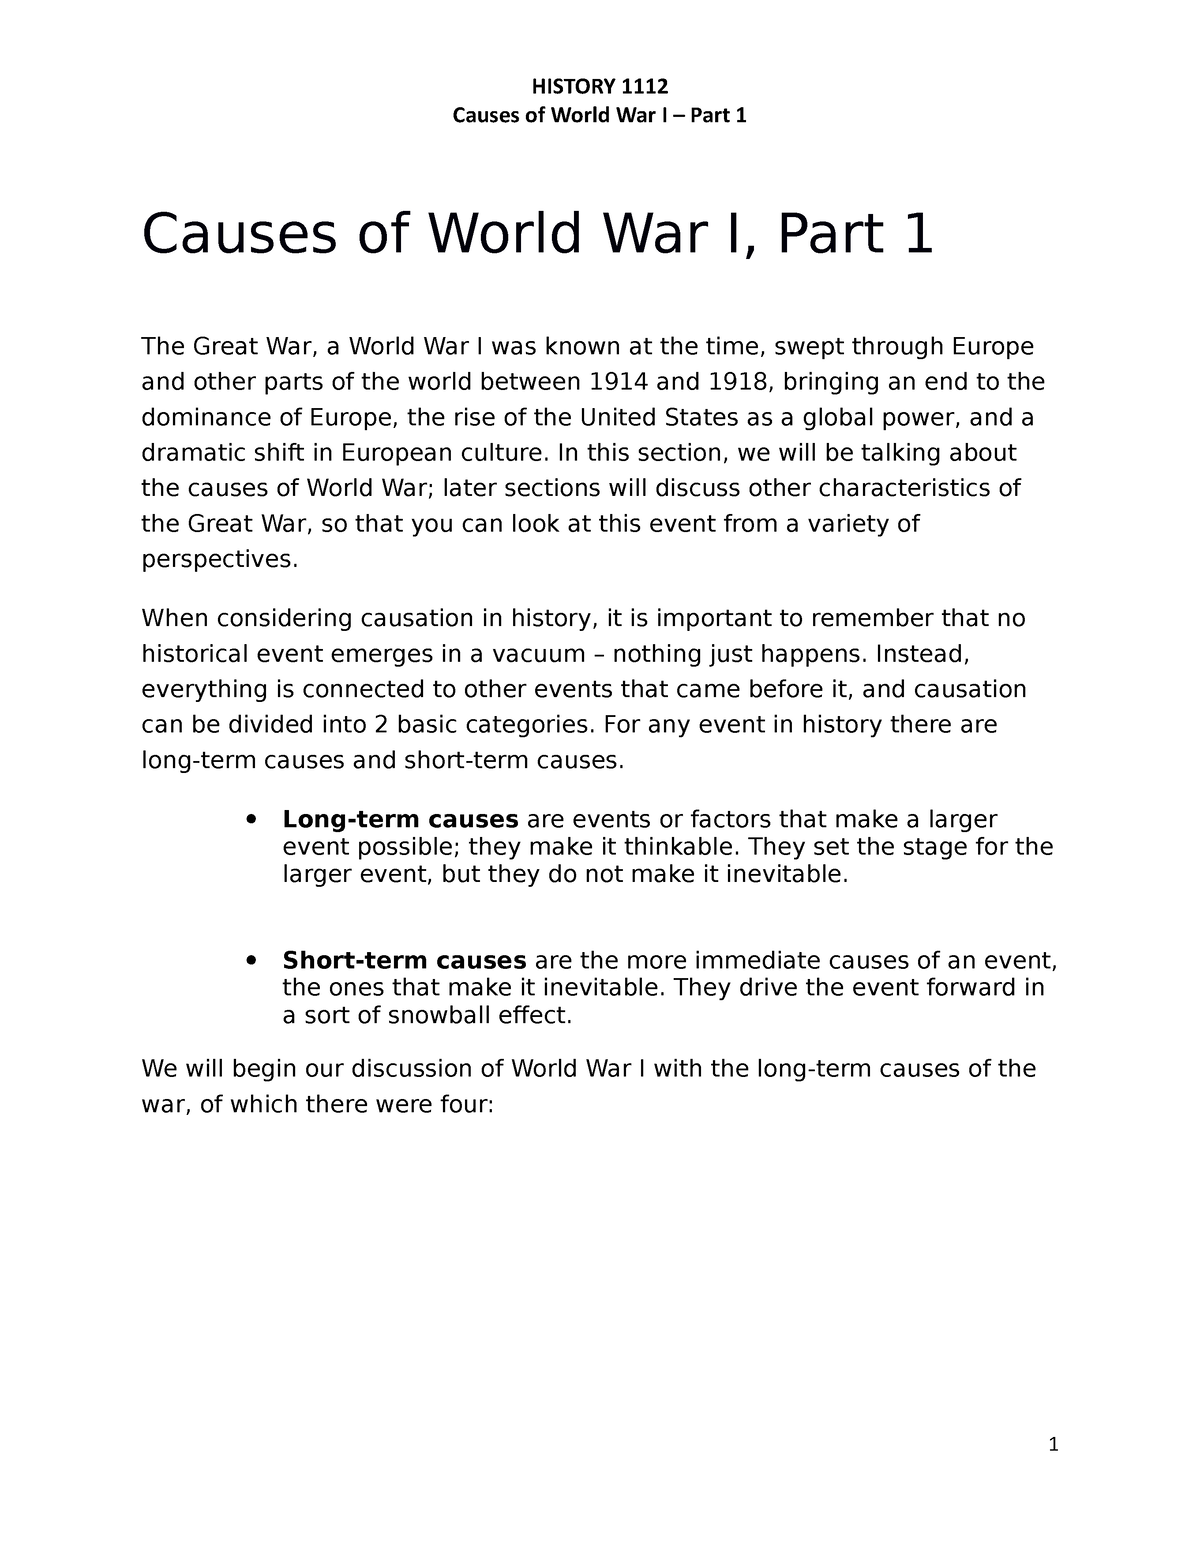 Remembering World War I, History, Causes & Impact